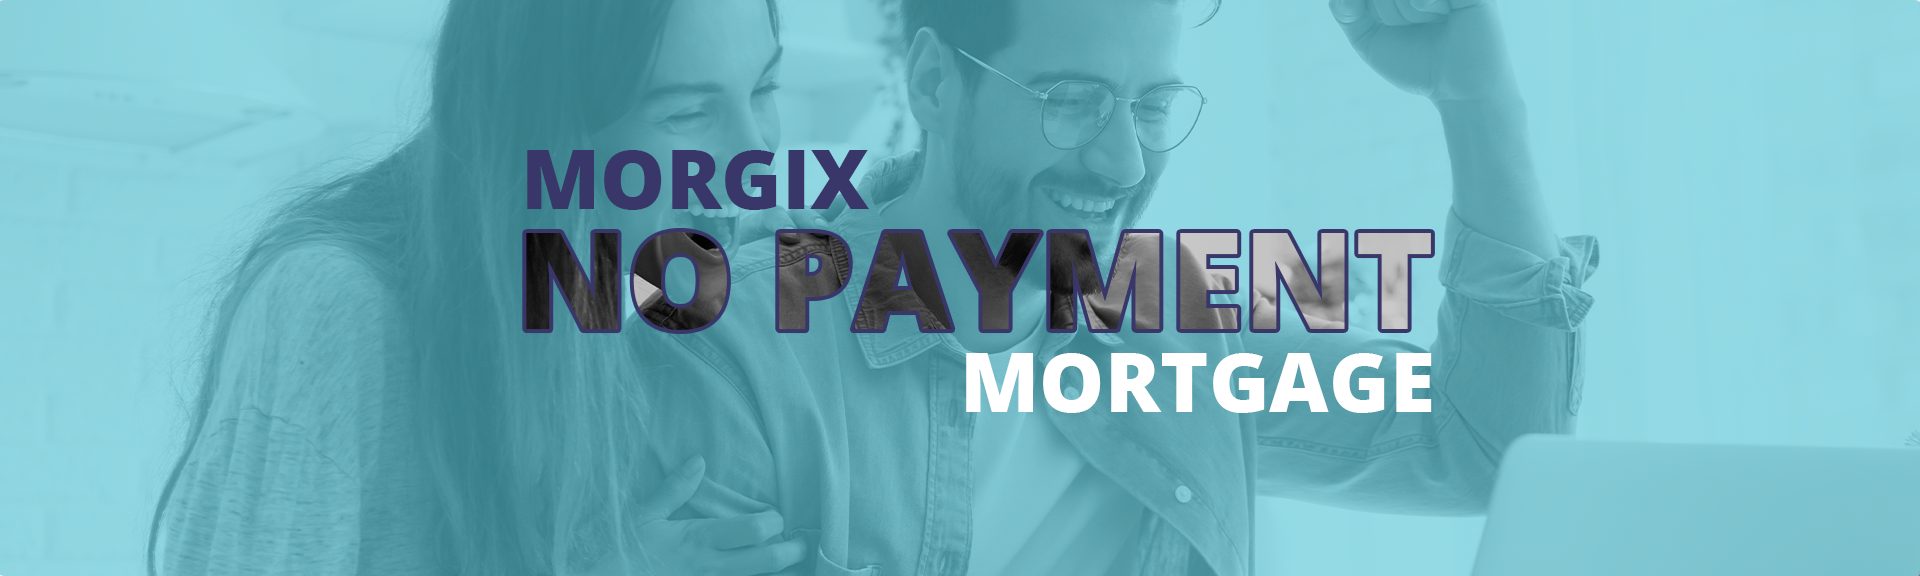 No Payment Mortgage